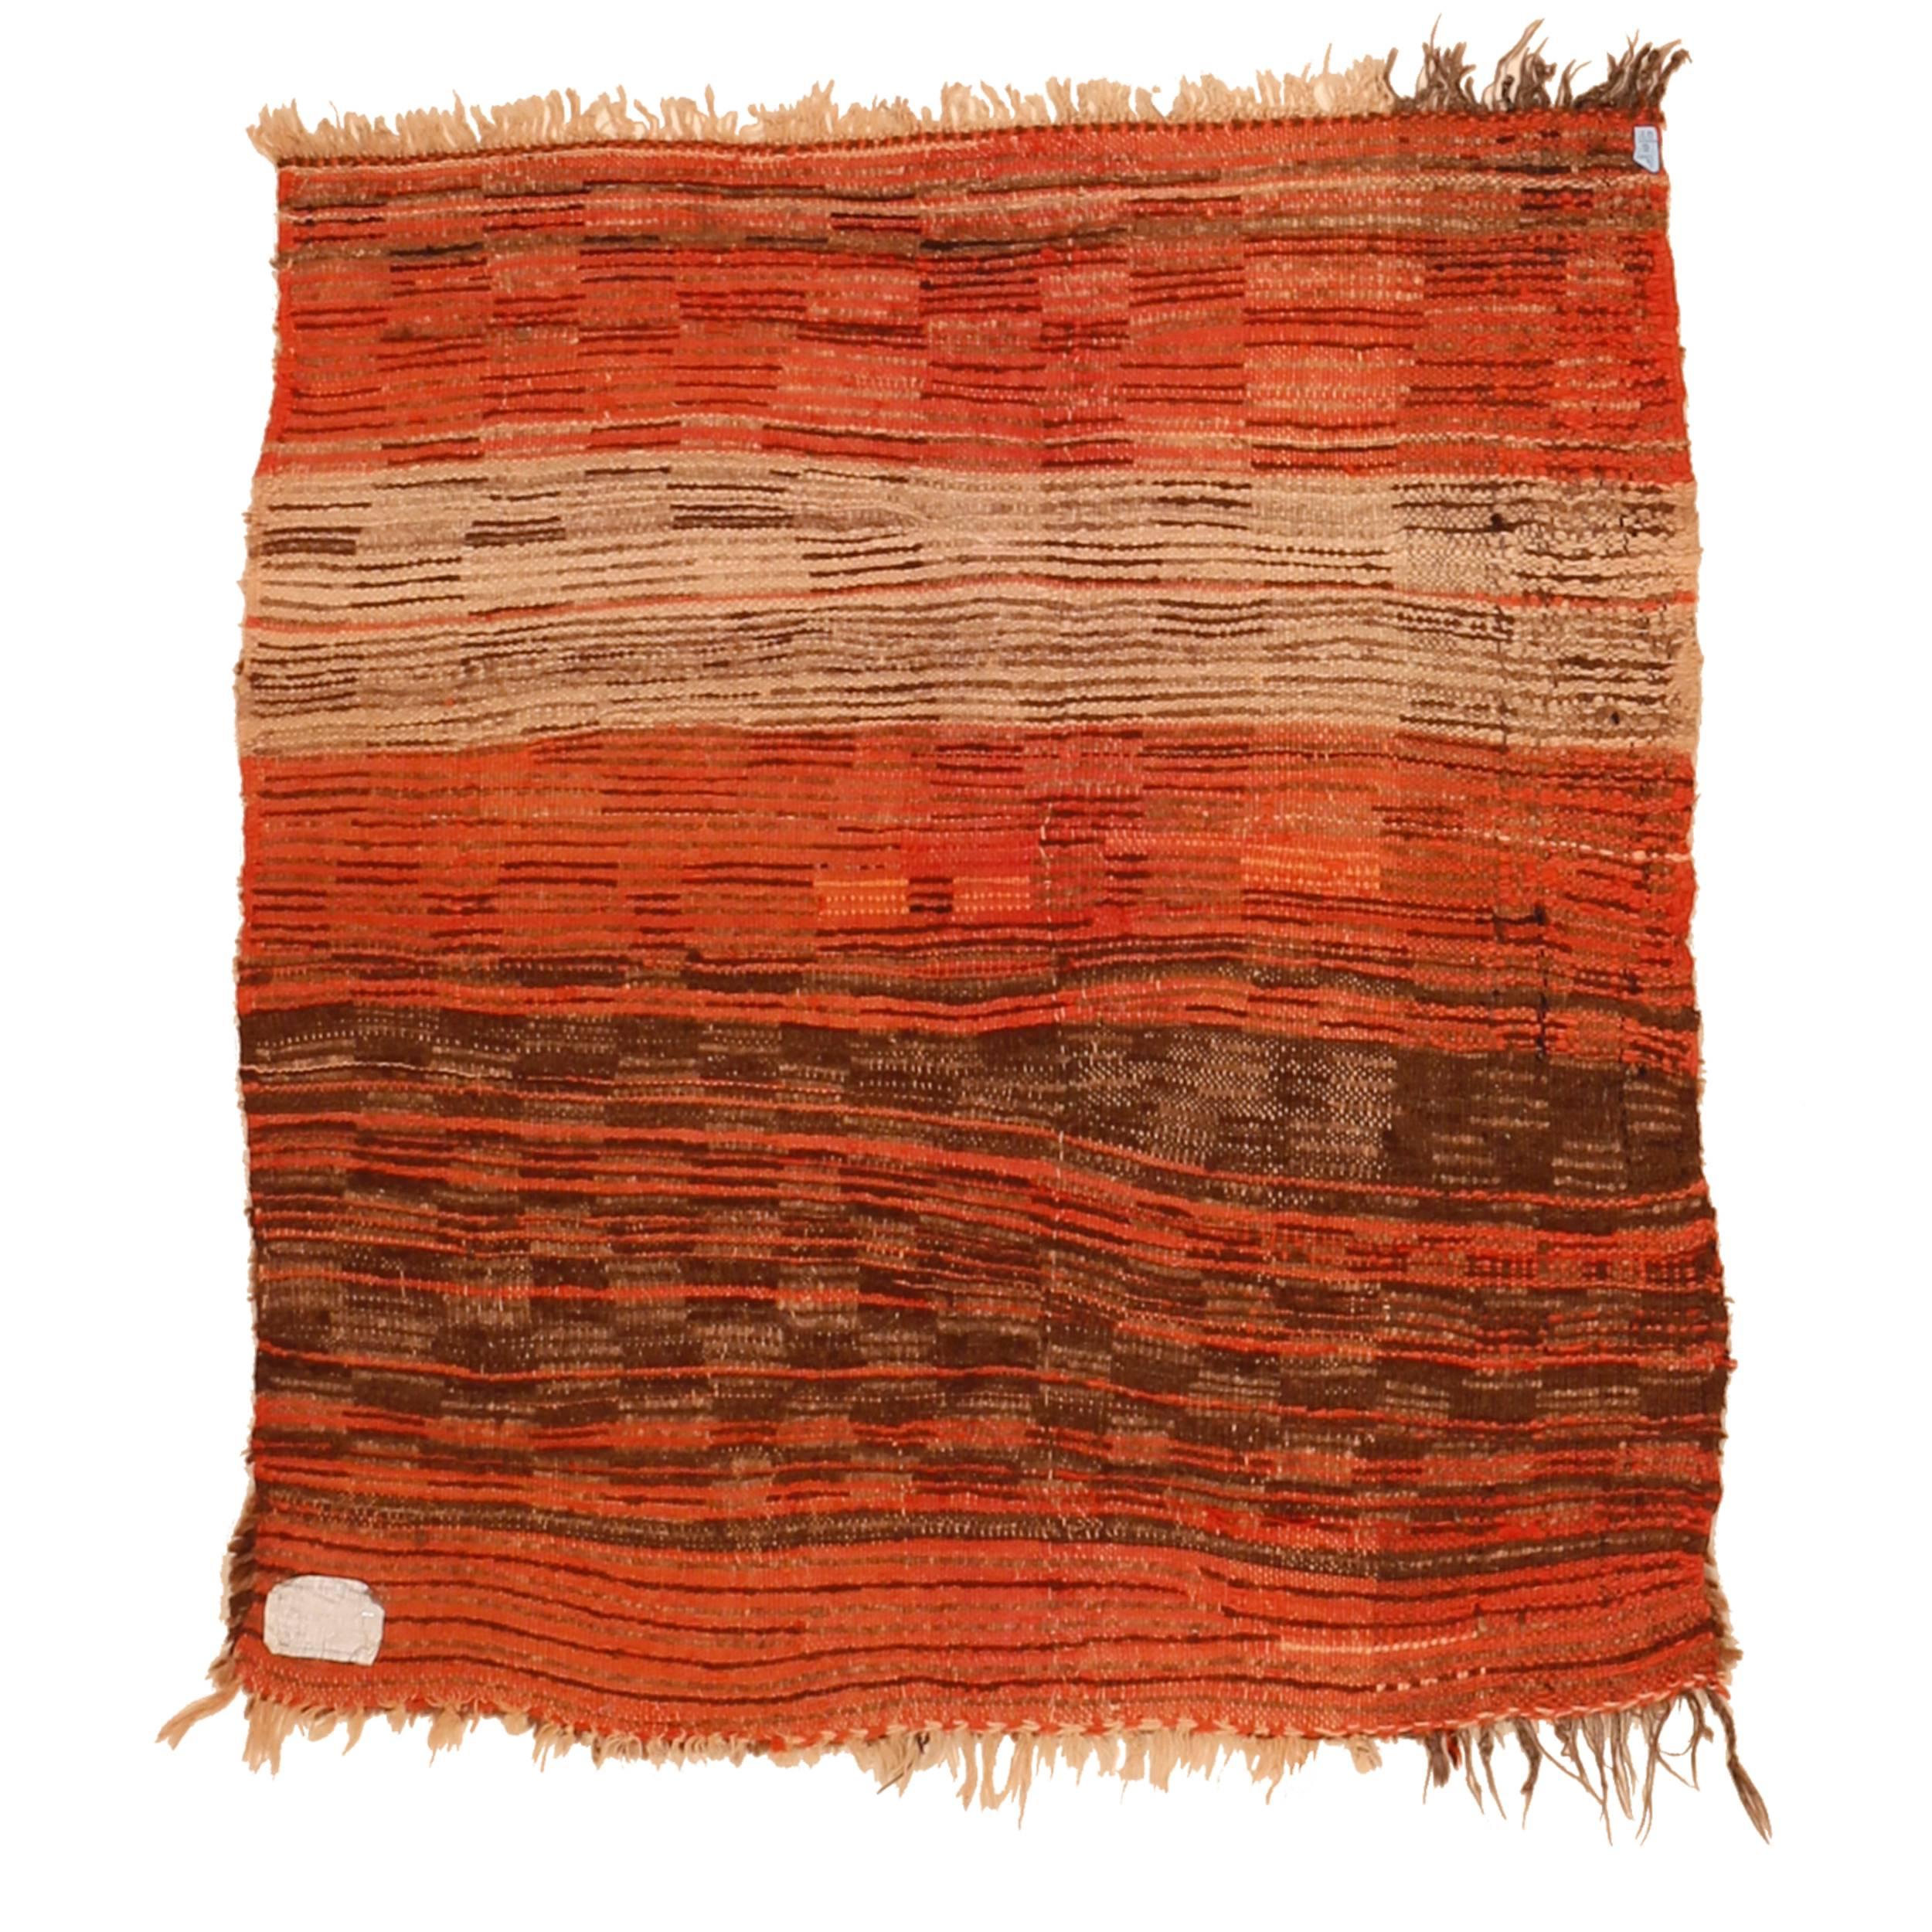 Boujads are woven from Arab tribes and Arabised Berber tribes located on the western foothills of the Middle Atlas, between the towns of Boujad and Beni Mellal. The rugs of the Boujad area are distinguished by an abstract rendition of codified